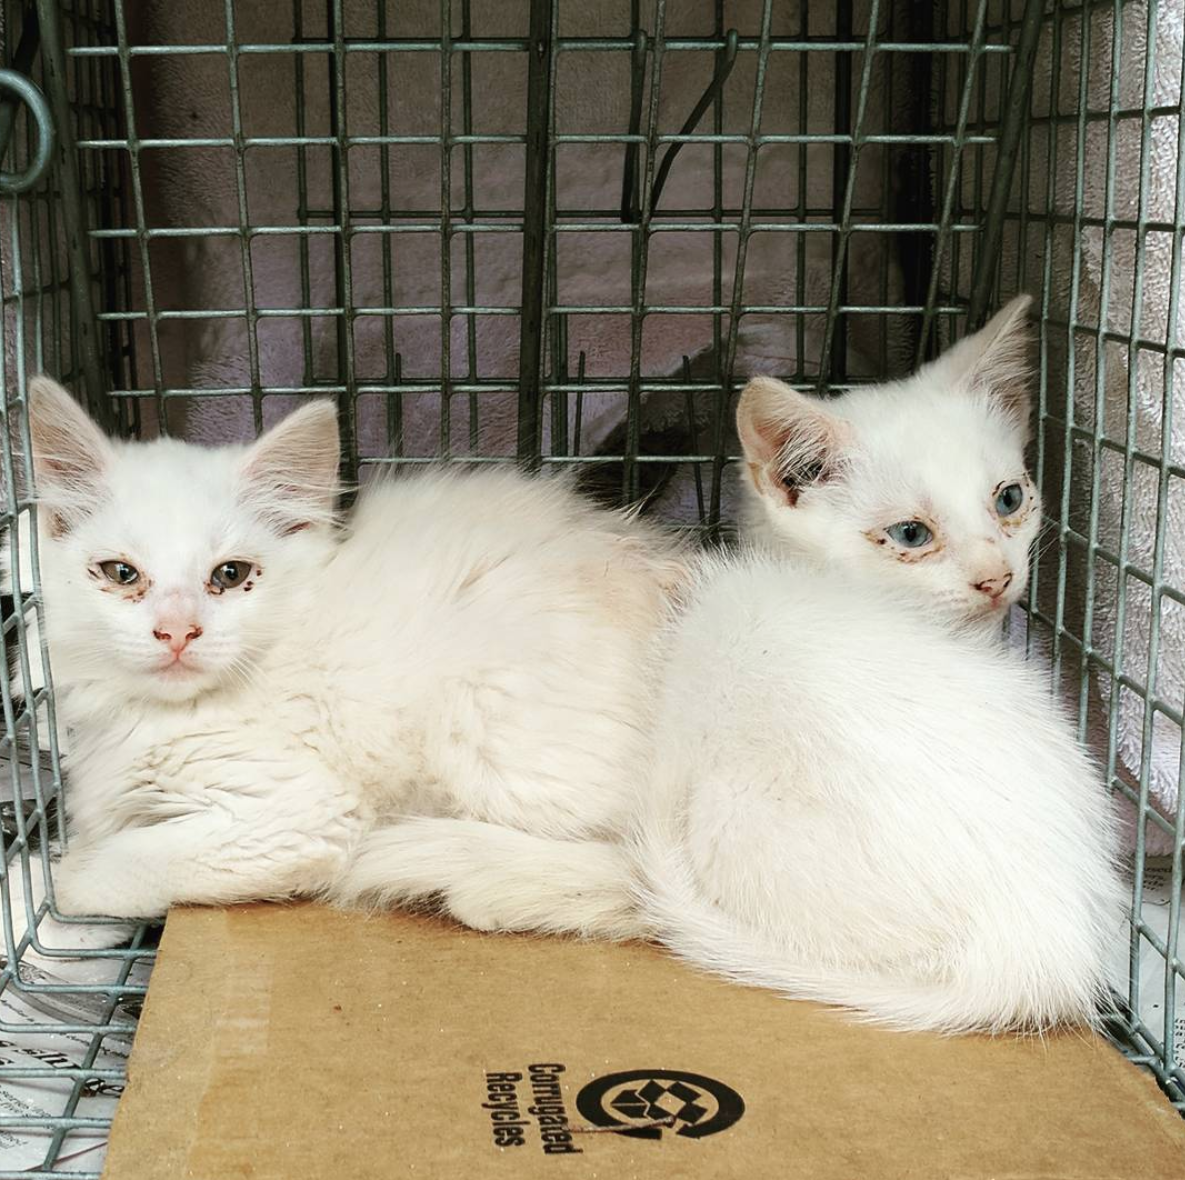 These beautiful babies were trapped, medicated, and eventually adopted into loving homes, because of our Community Cat Program.